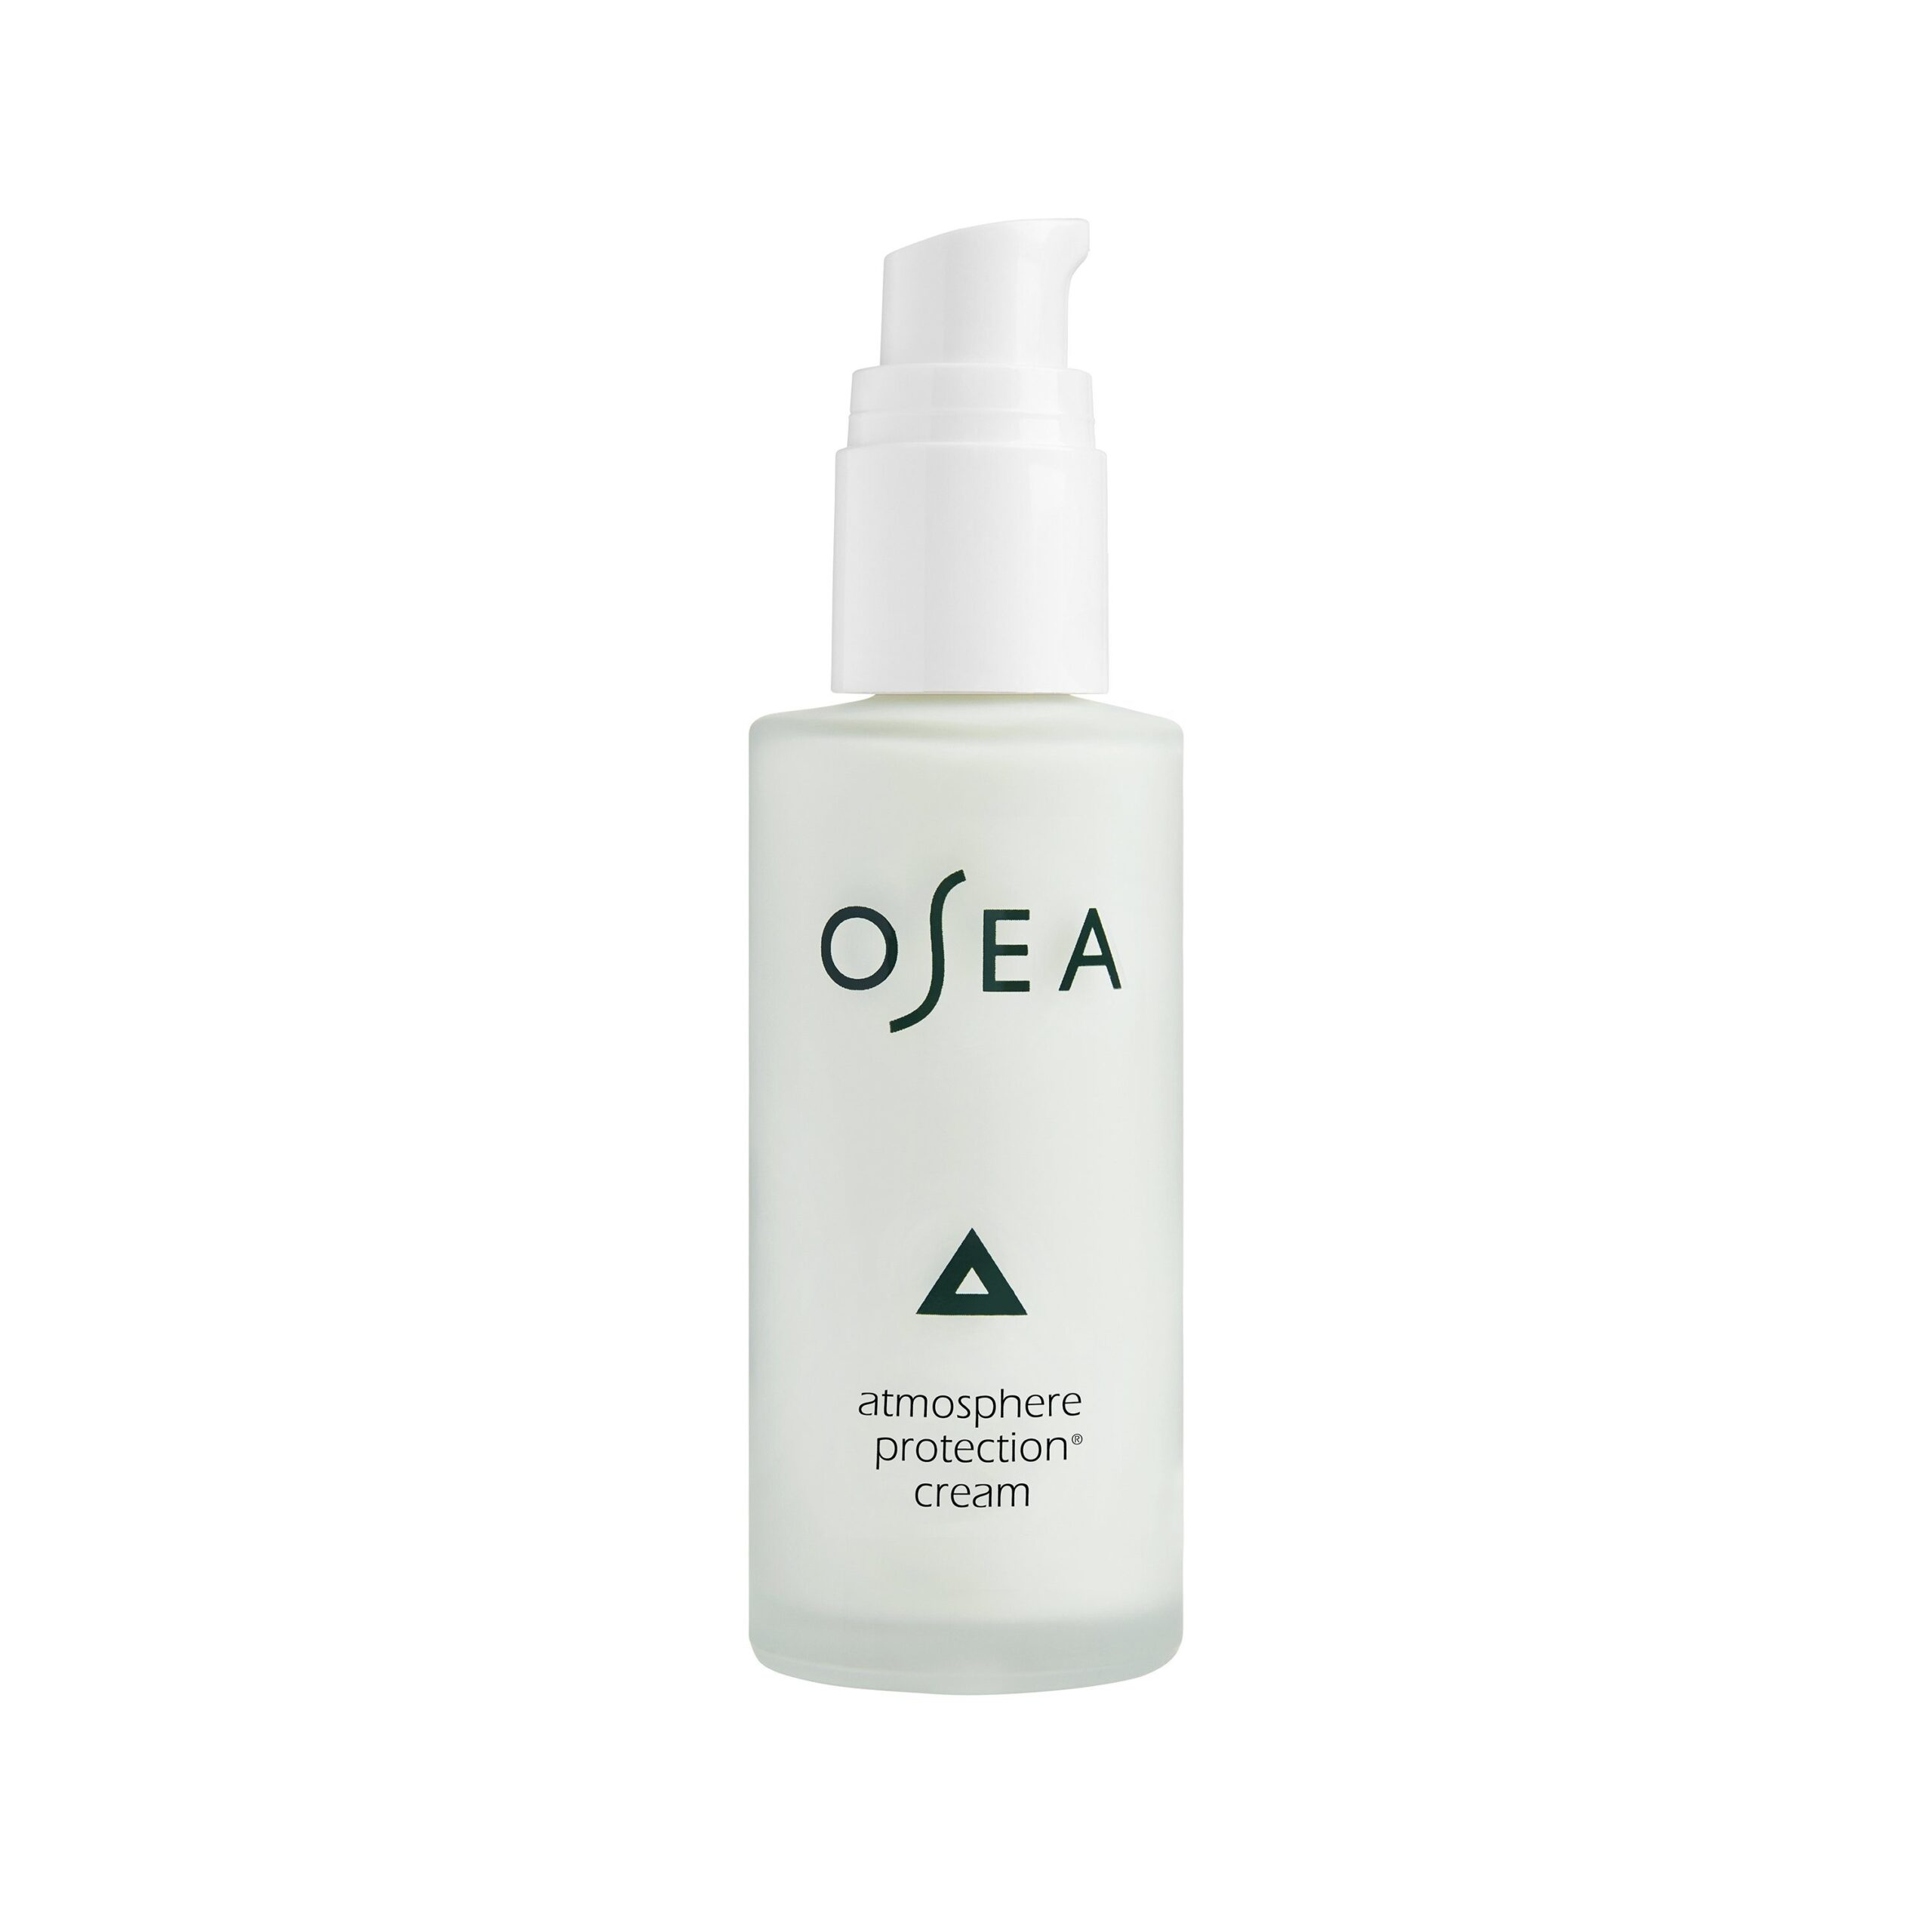 OSEA Atmosphere Protection Cream